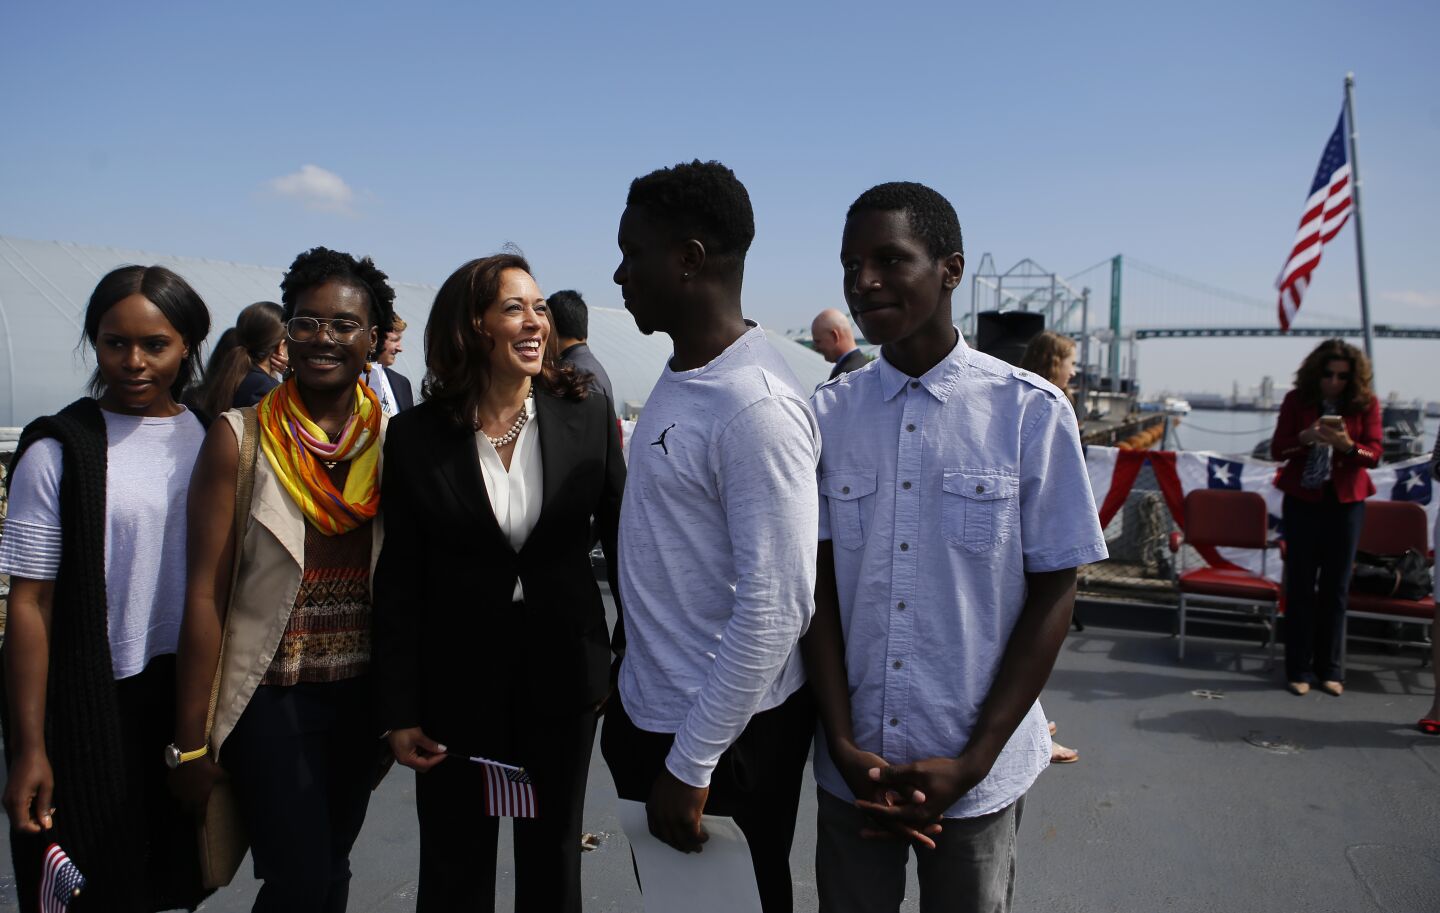 Kamala Harris greets people who were sworn in as citizens in a ceremony on the battleship Iowa in Los Angeles in 2017.